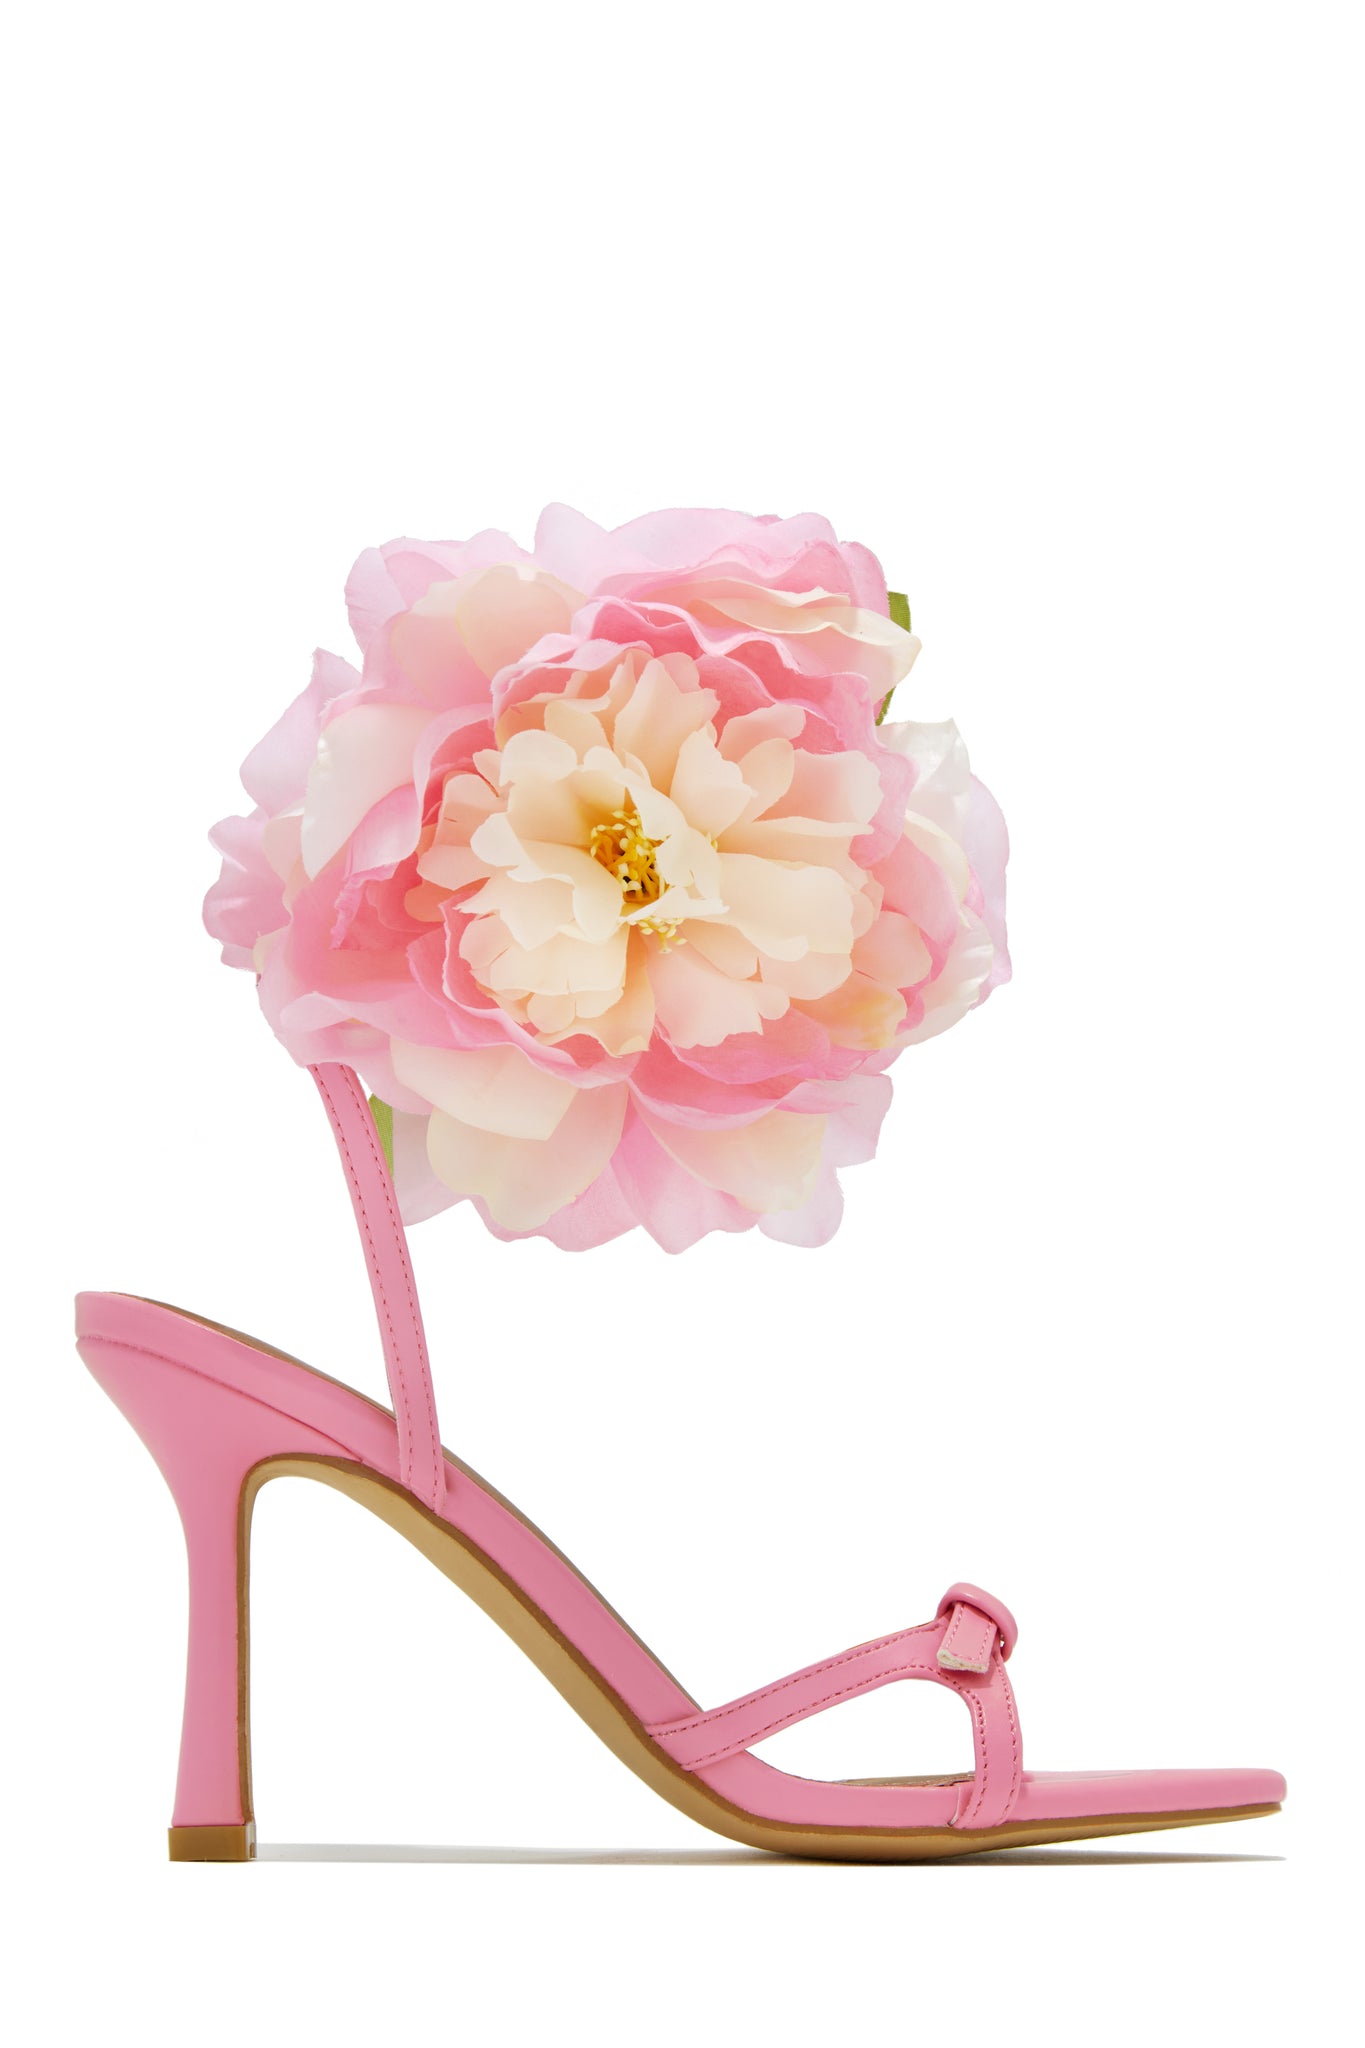 Buy Floral High Heels Online In India - Etsy India